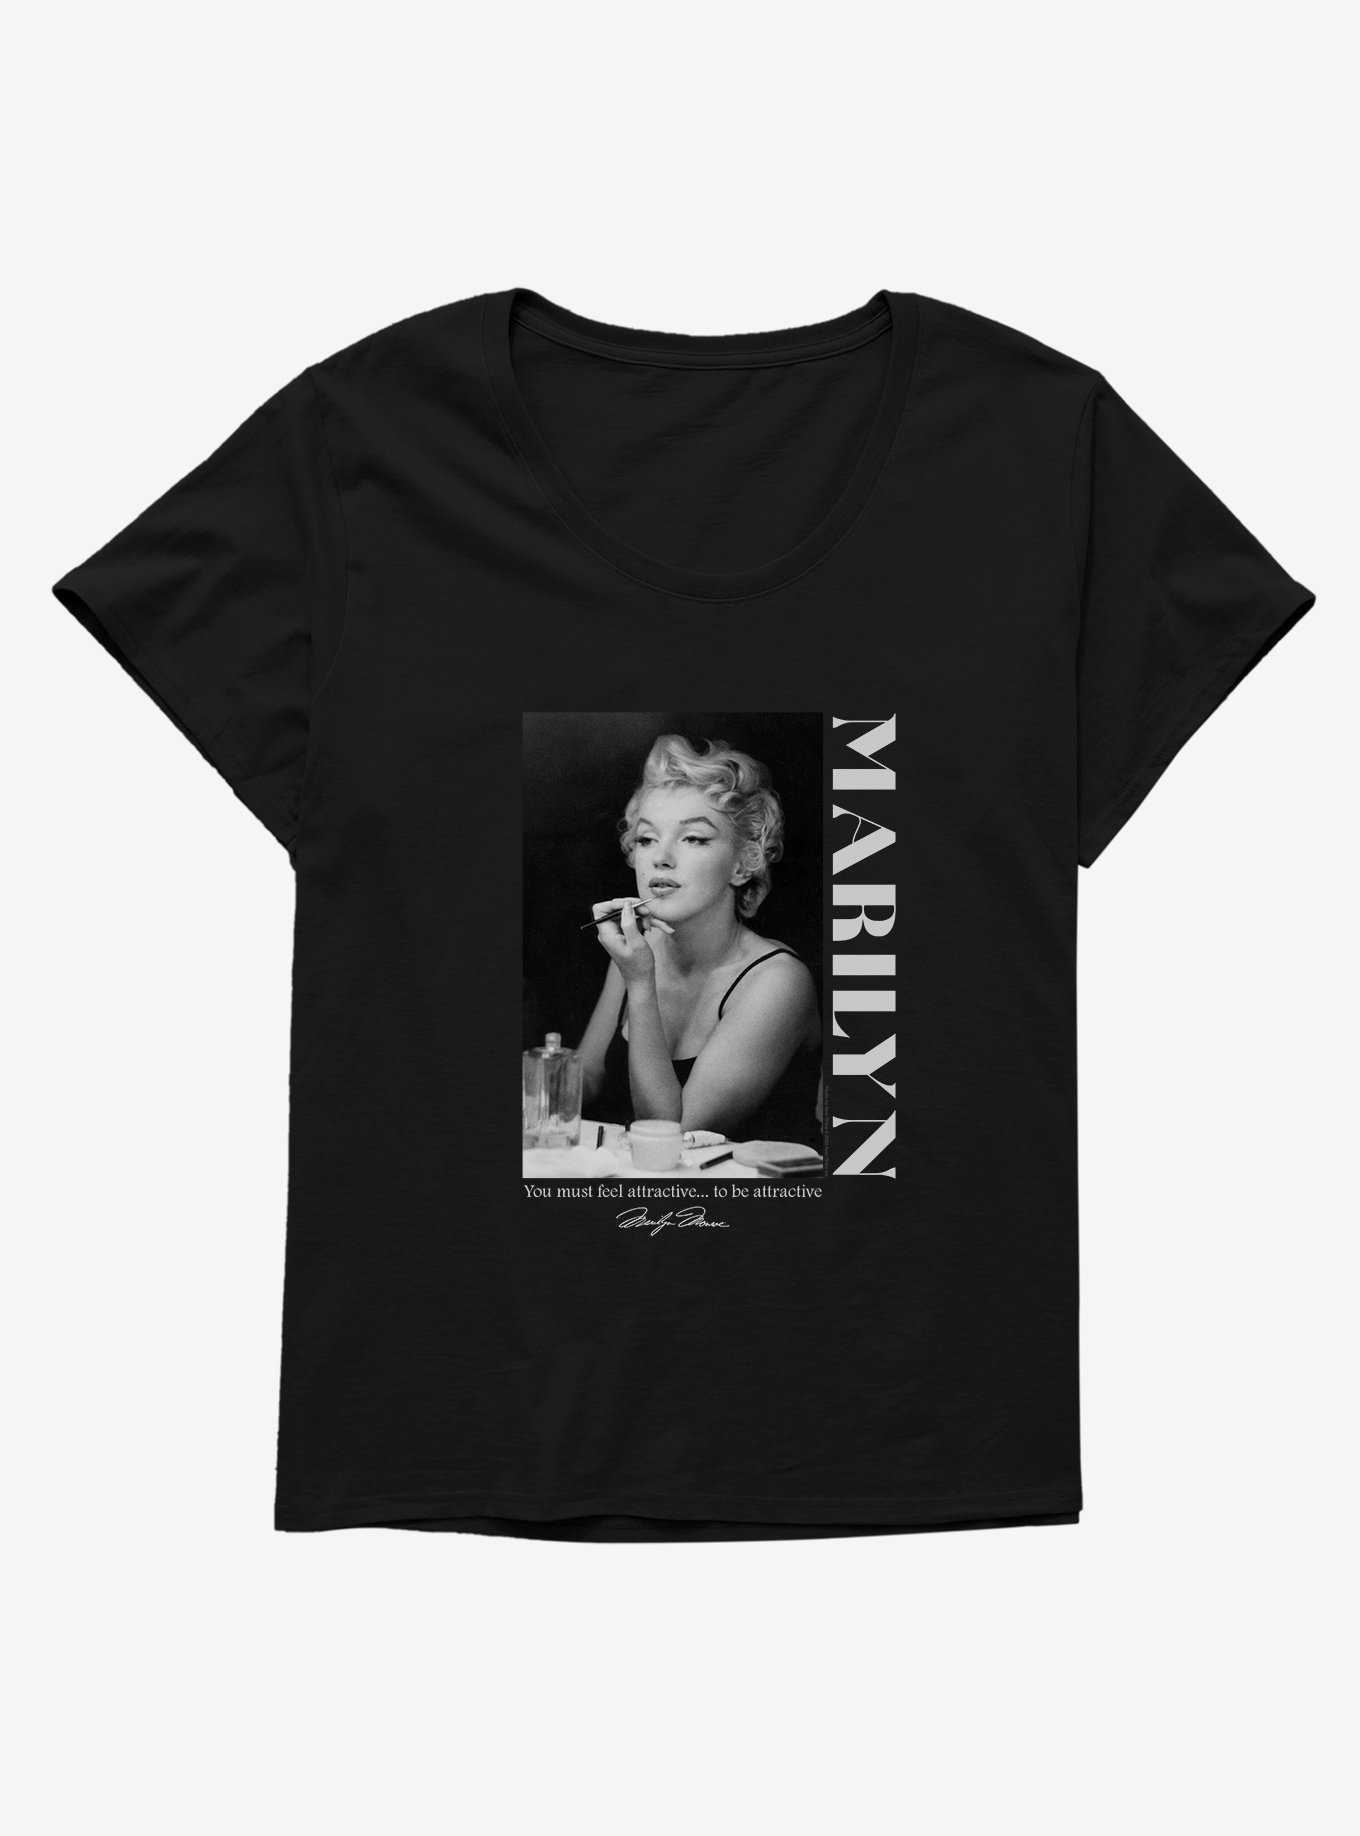 Marilyn Monroe To Be Attractive Mirror Girls T-Shirt Plus Size, , hi-res